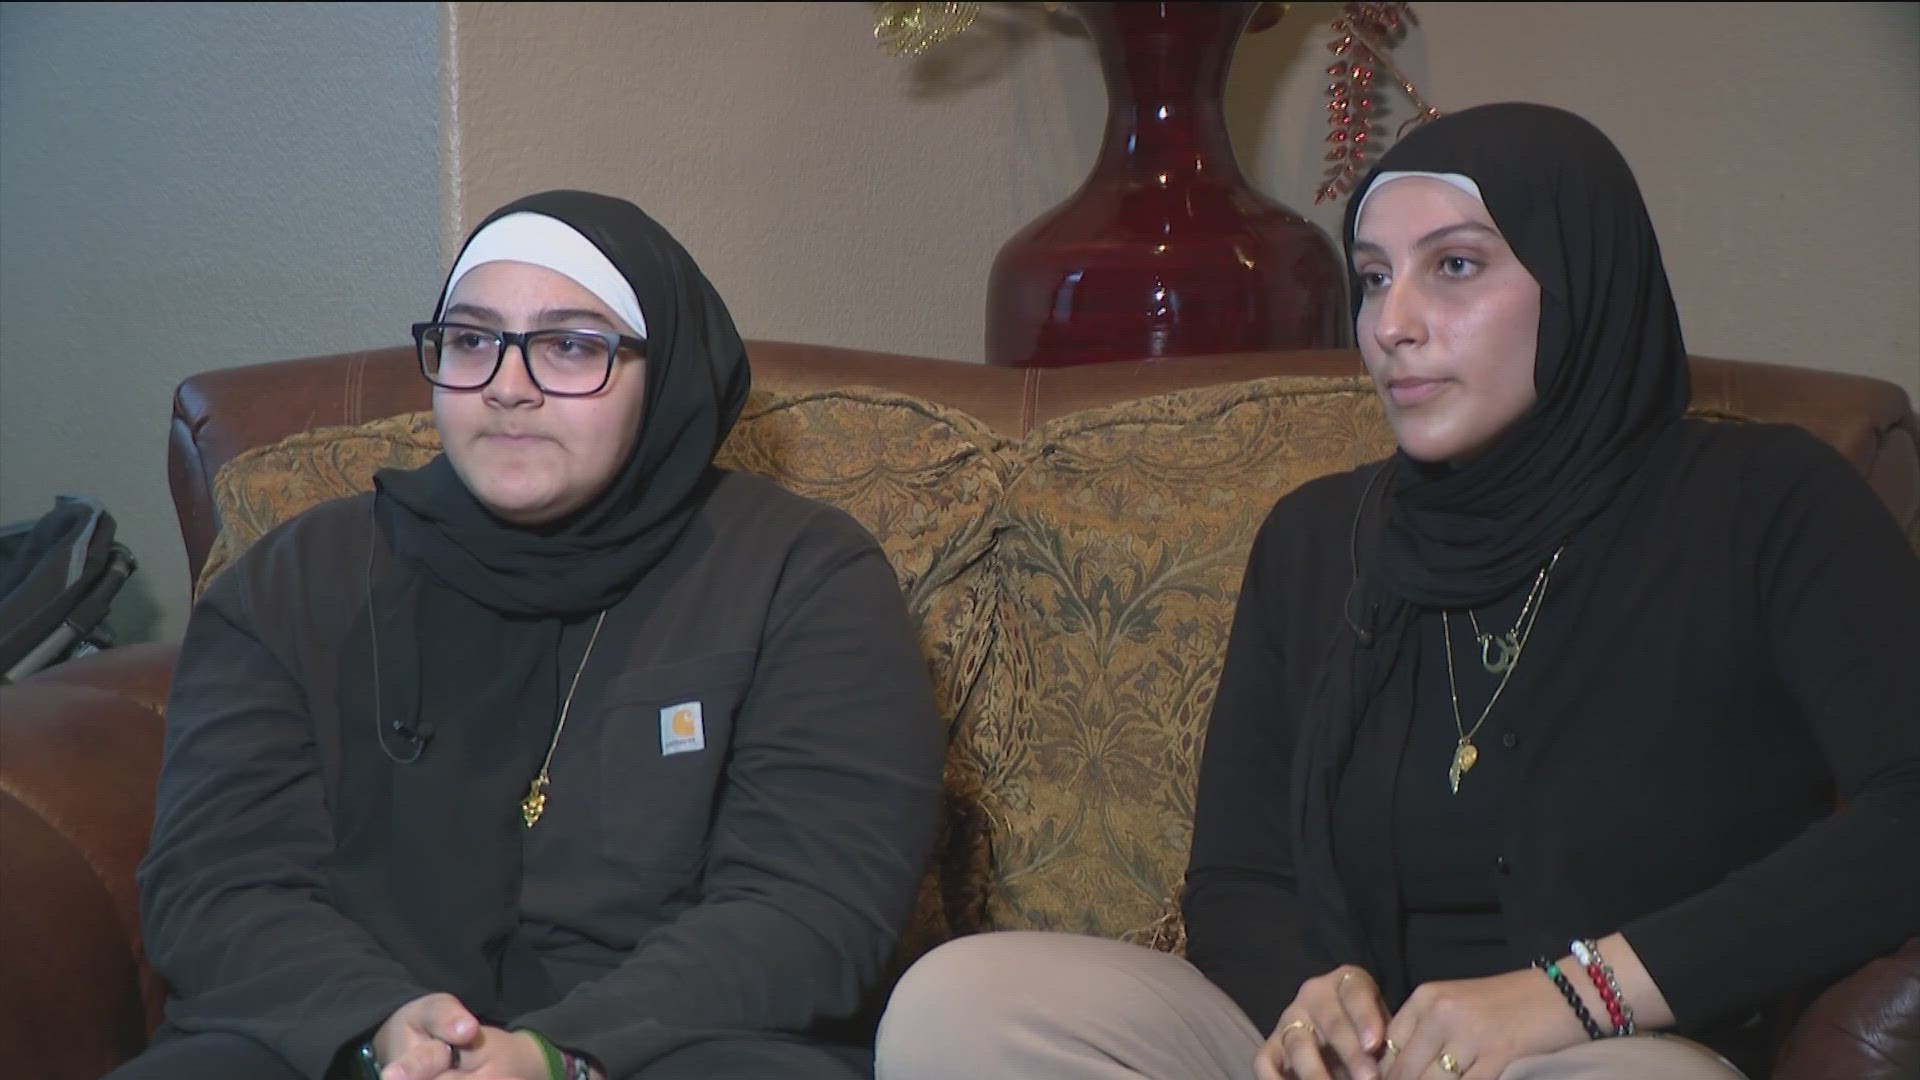 As war rages on in the Middle East, many in Central Texas are feeling the effects. Some residents are facing more incidents of hate.